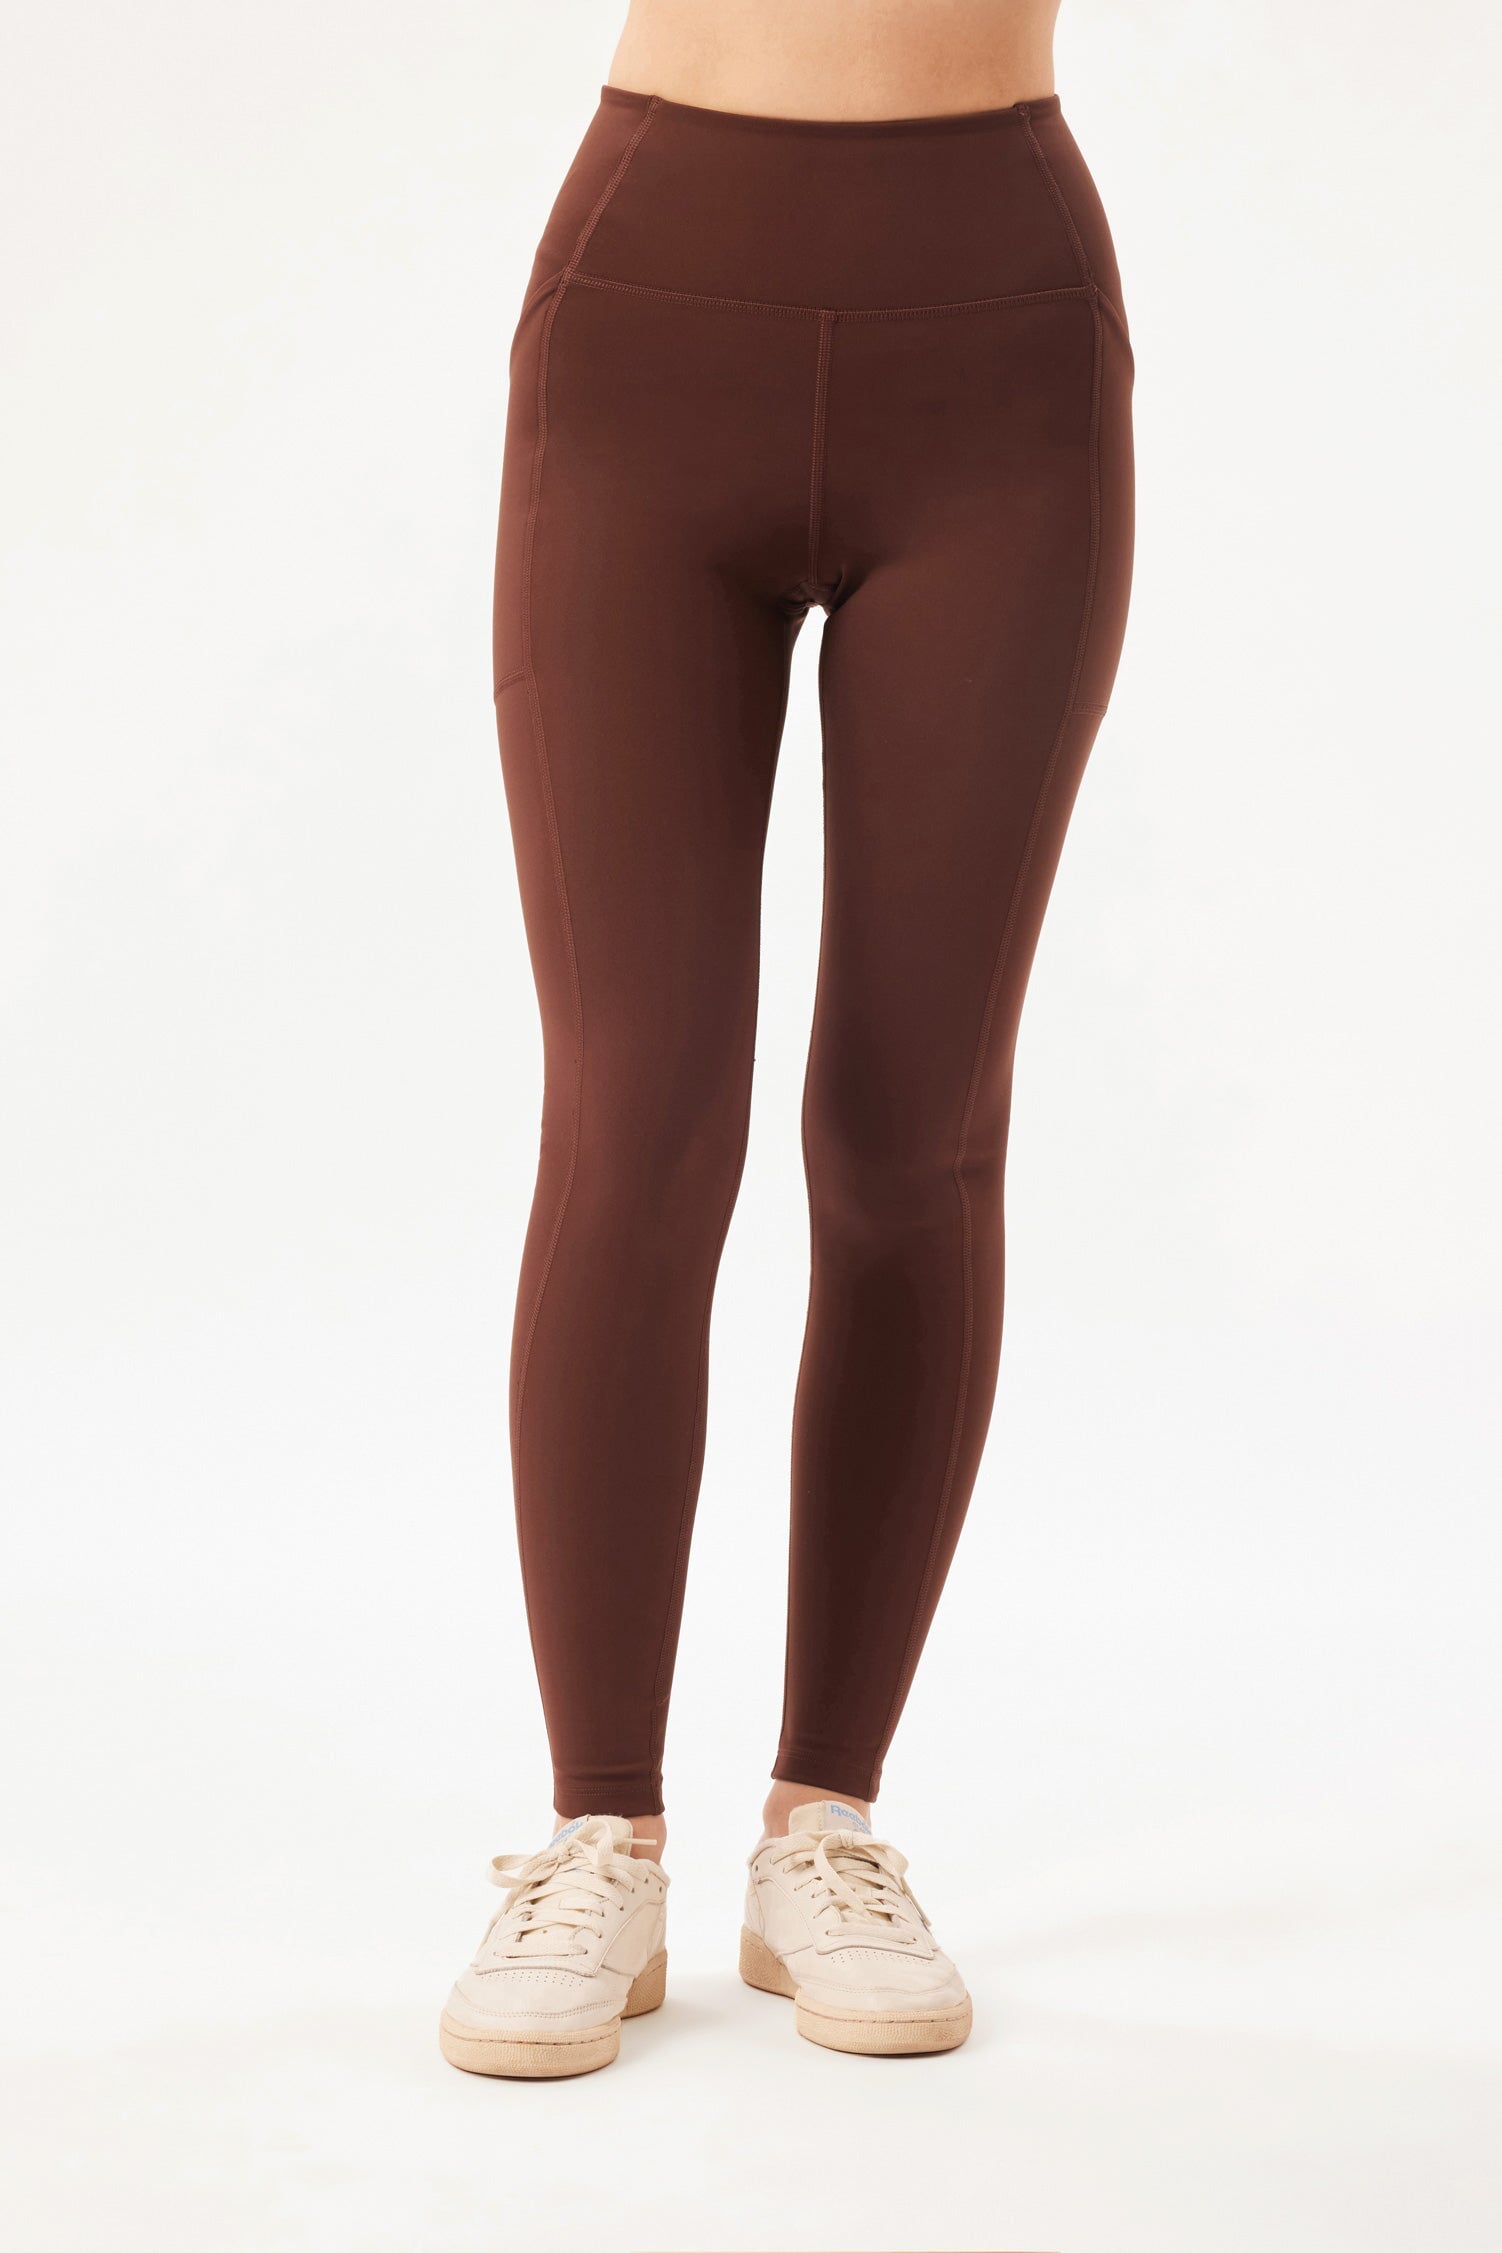 Sporty Staples: Solid Color Leggings for Active Girls - Chocolate – Soldier  Complex